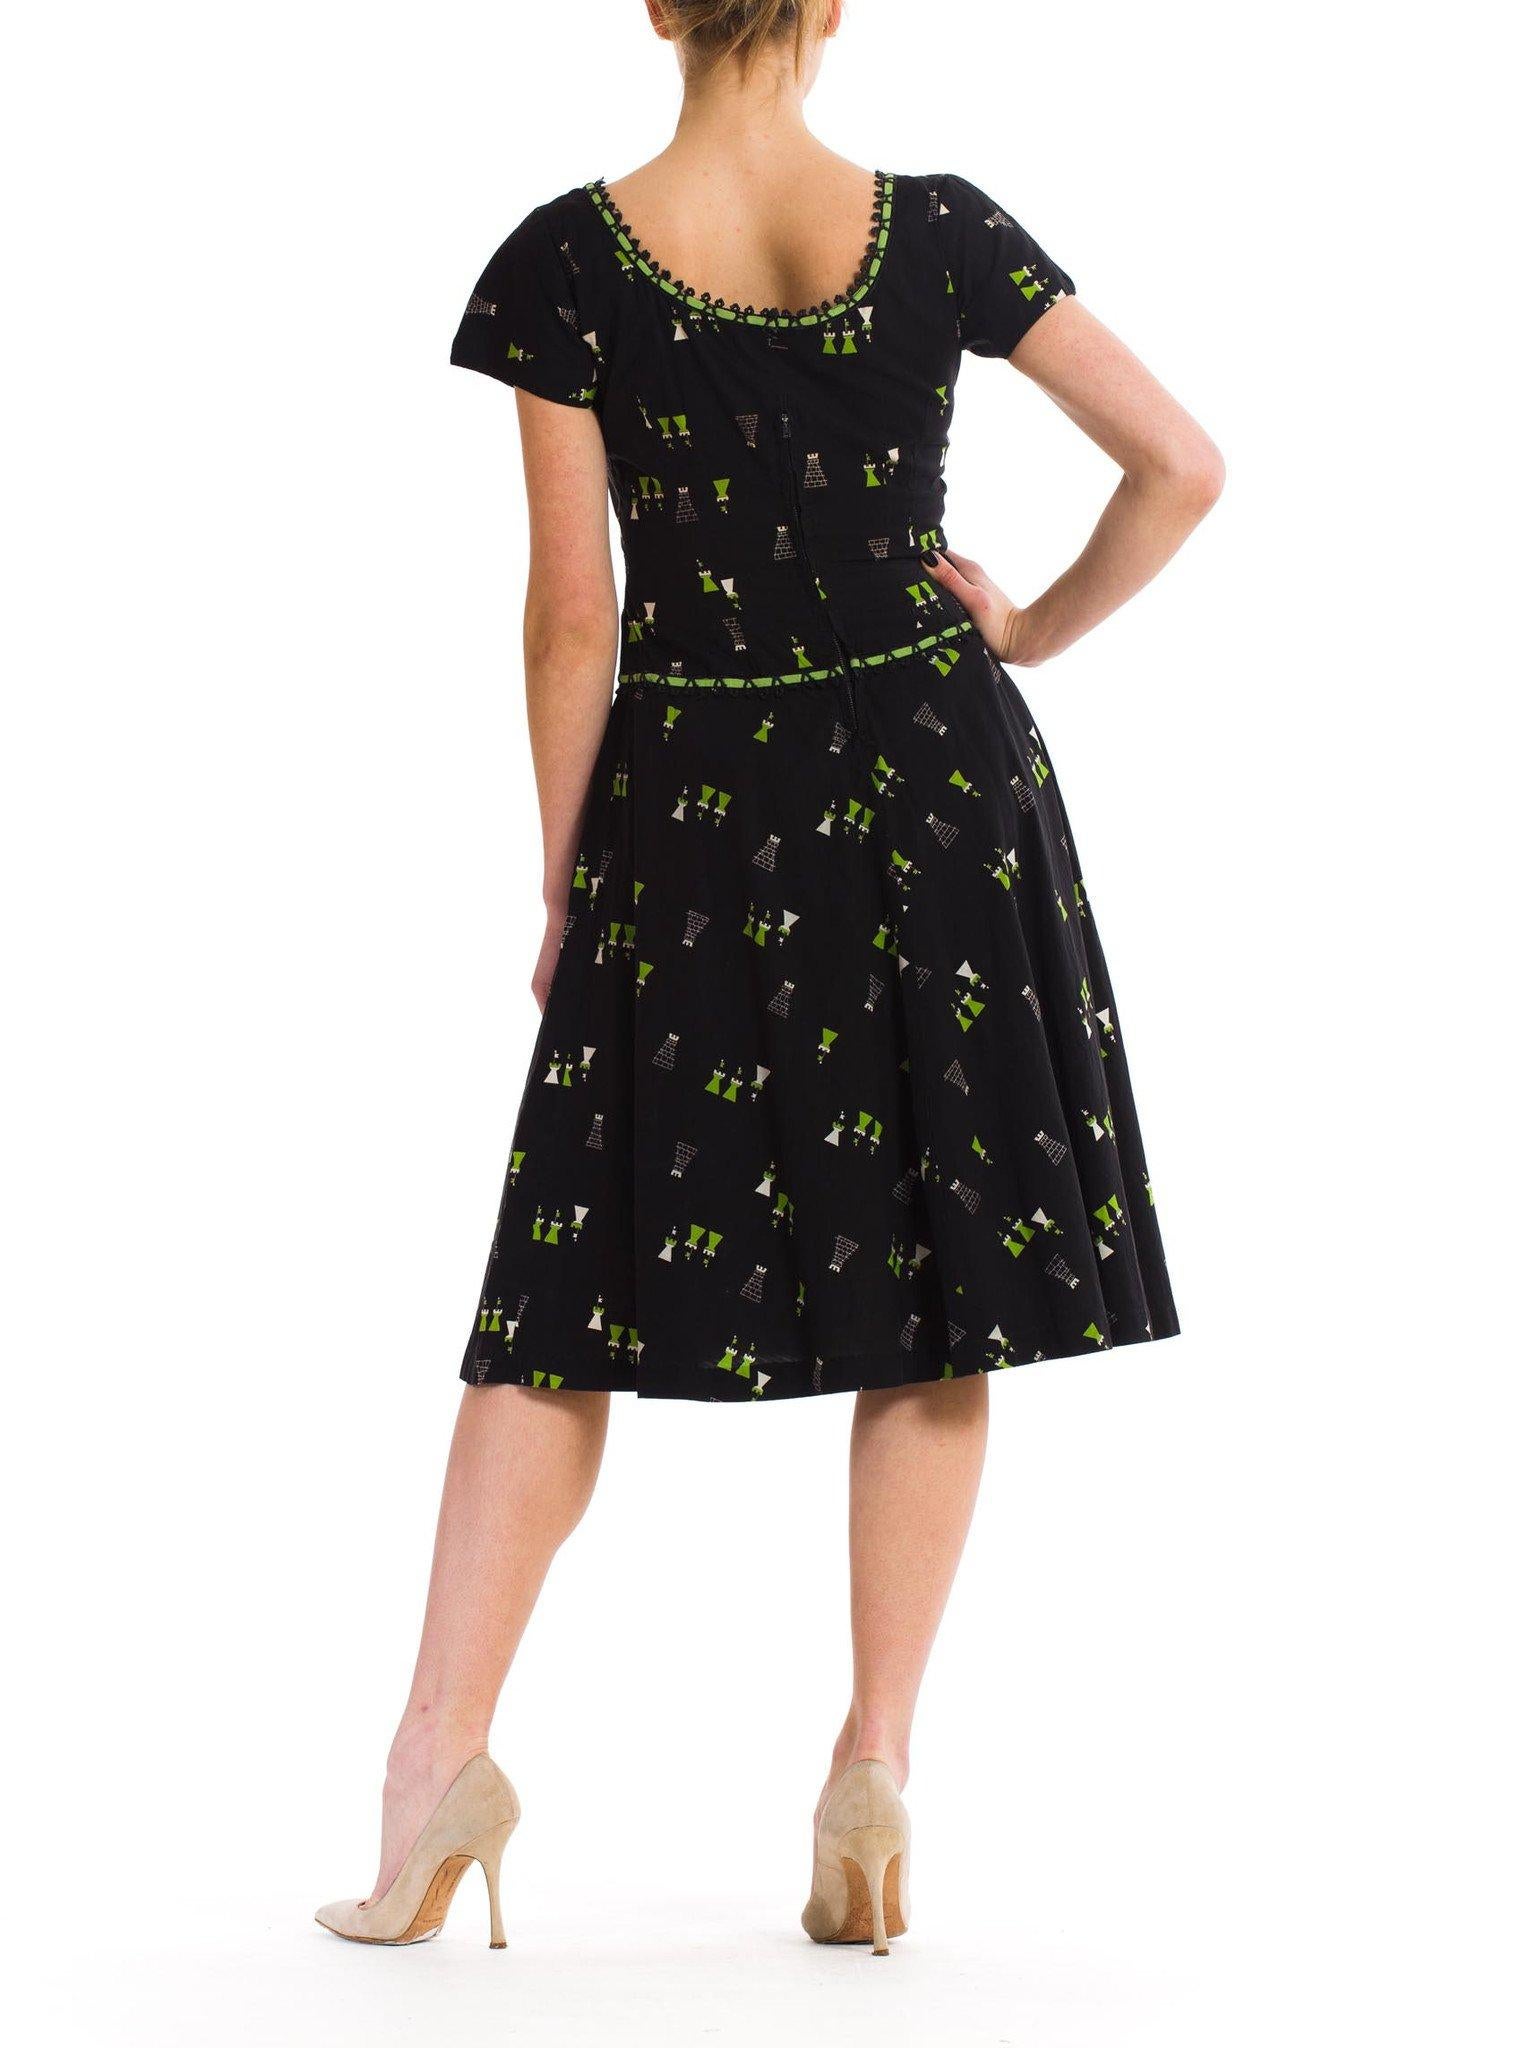 1950S Black Cotton Day Dress Printed With Cute Green Castles For Sale 3